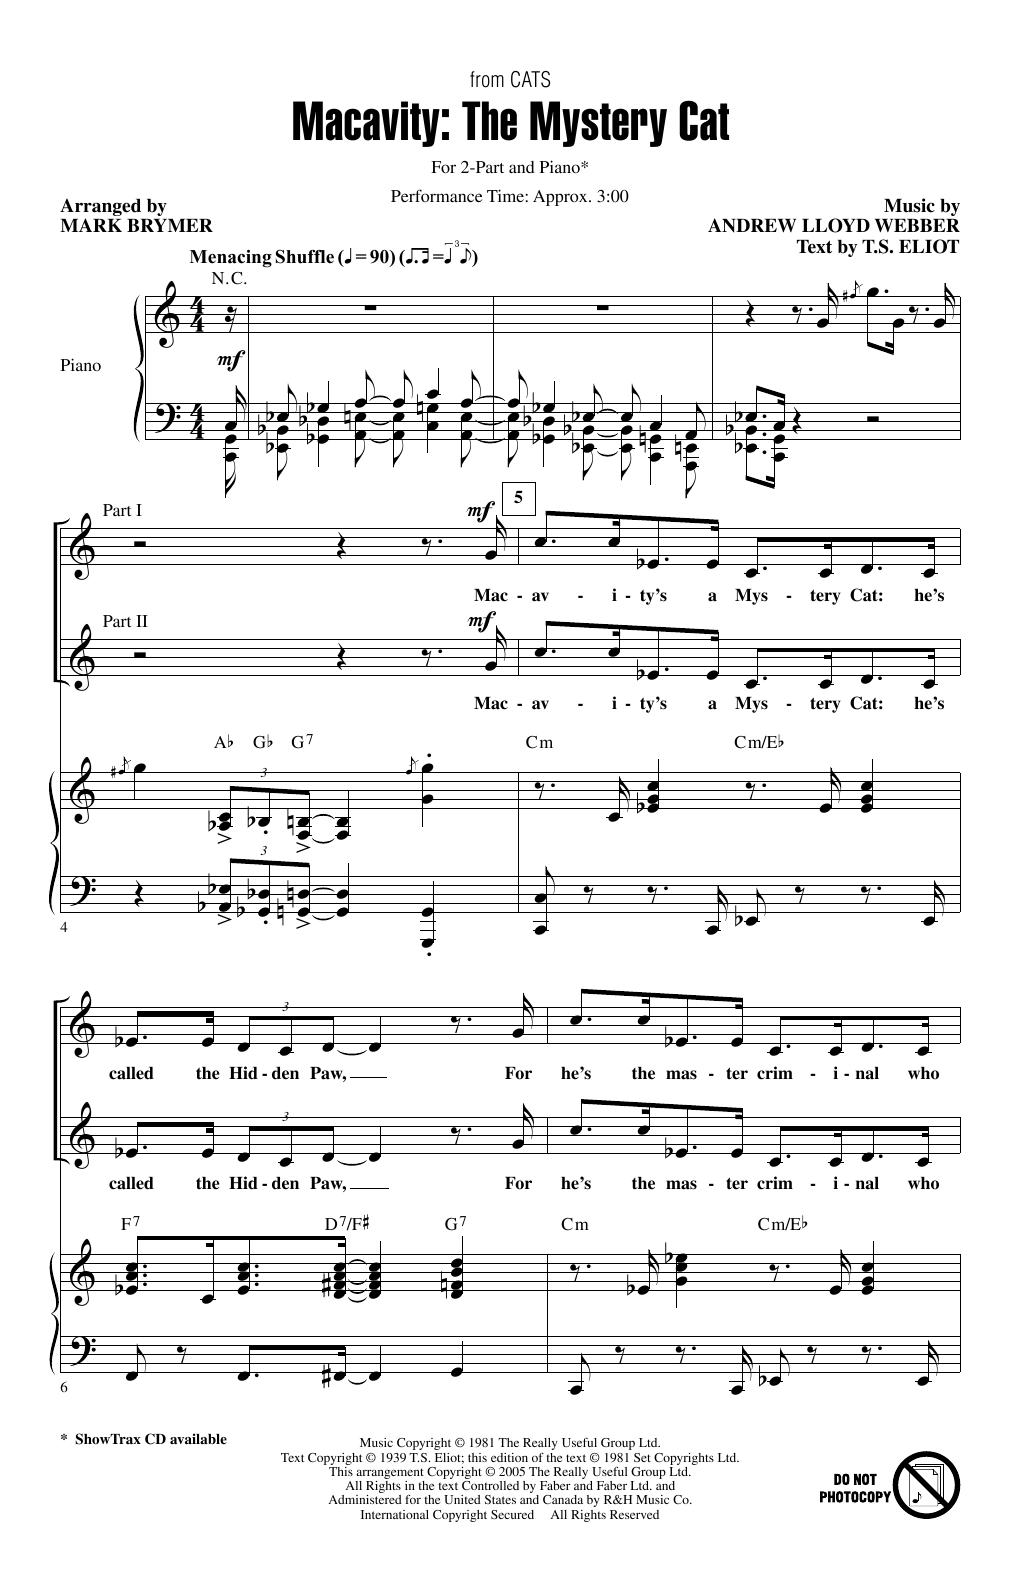 Andrew Lloyd Webber Macavity: The Mystery Cat (from Cats) (arr. Mark Brymer) sheet music notes and chords. Download Printable PDF.